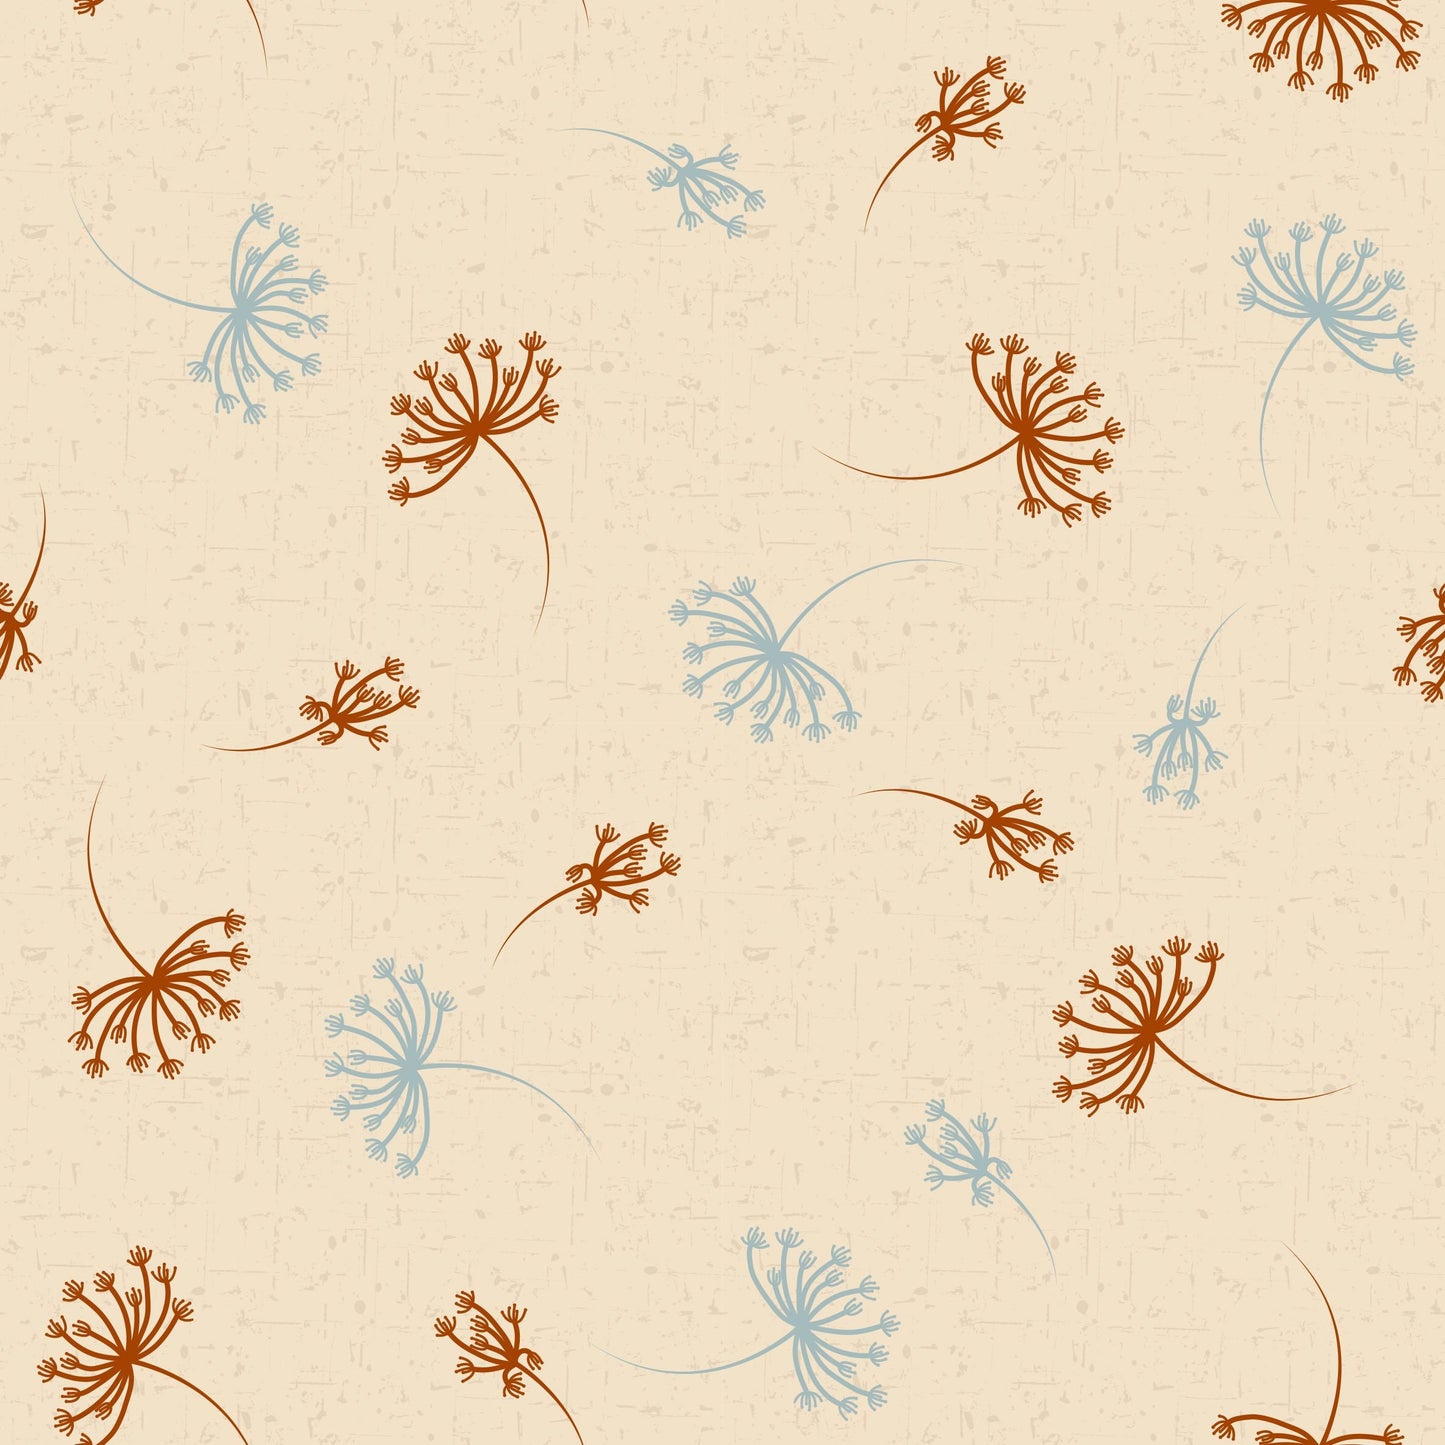 Birds on the Move Cognac and Dusty Blue Coloured Flowers on Sand 4501-416 Digitally Printed Cotton Woven Fabric